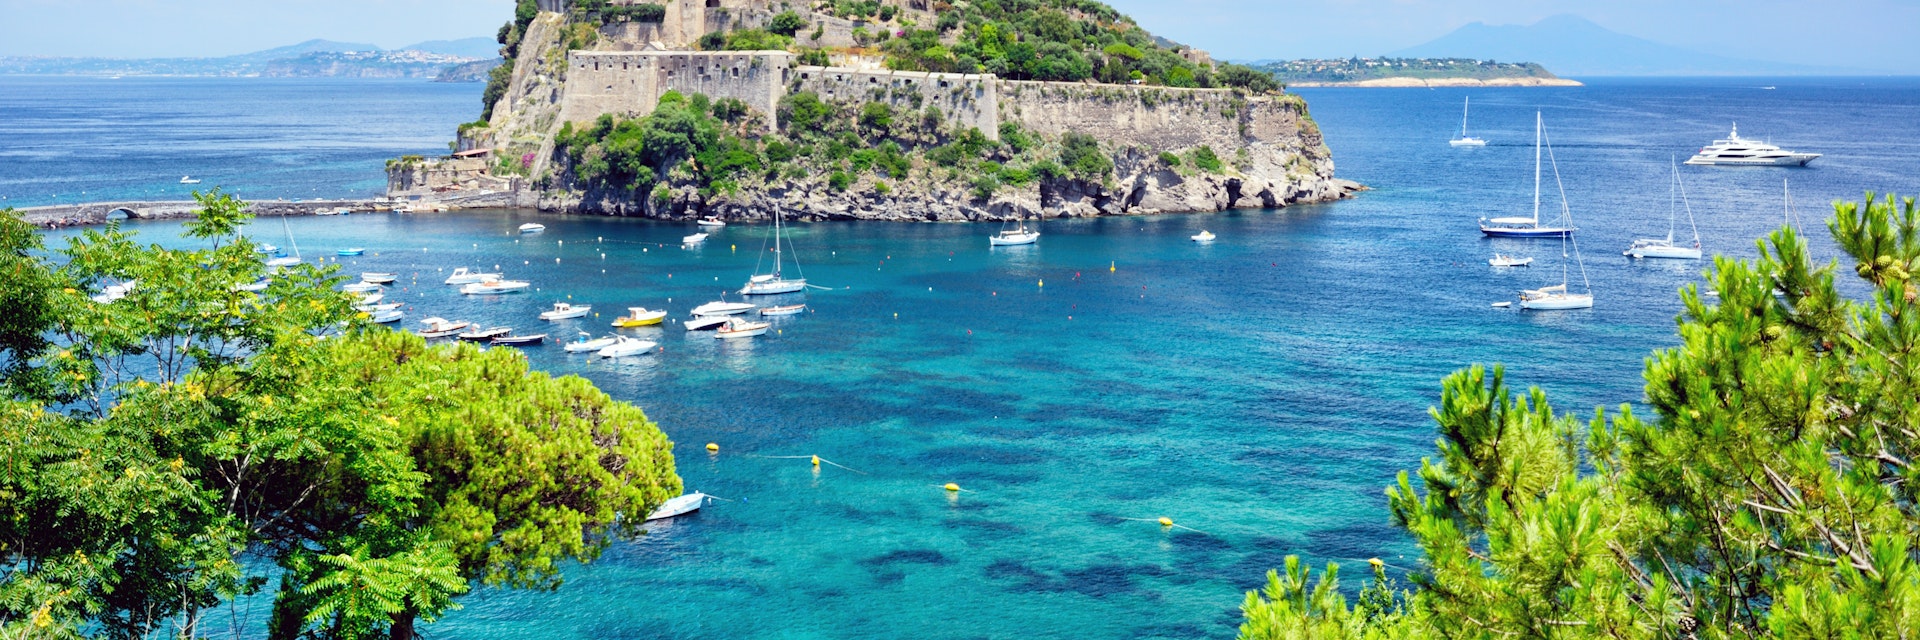 Ischia island, at the Gulf of Naples, Italy